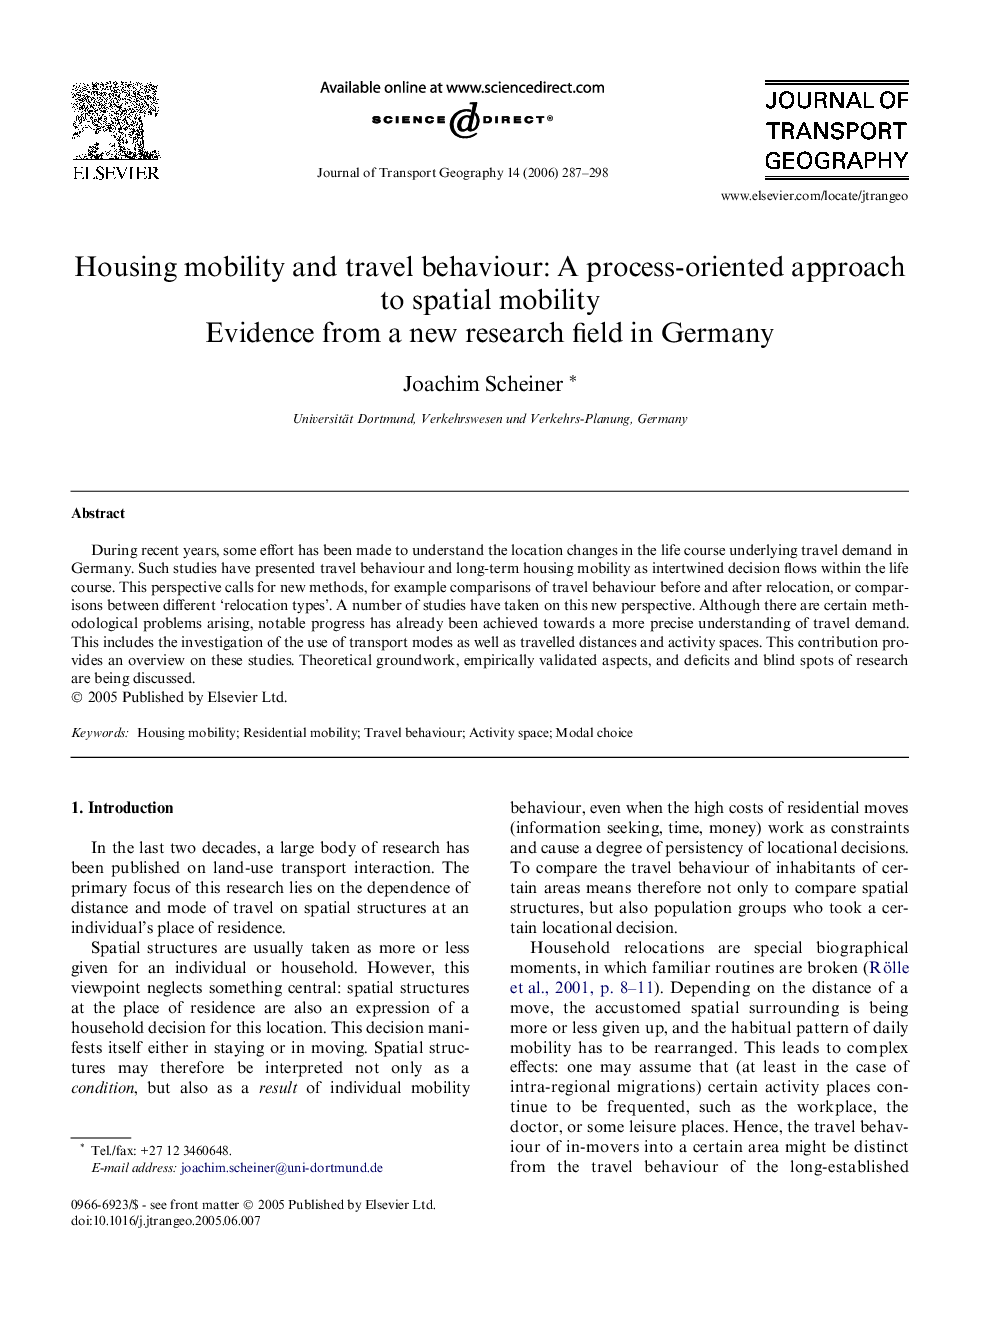 Housing mobility and travel behaviour: A process-oriented approach to spatial mobility: Evidence from a new research field in Germany